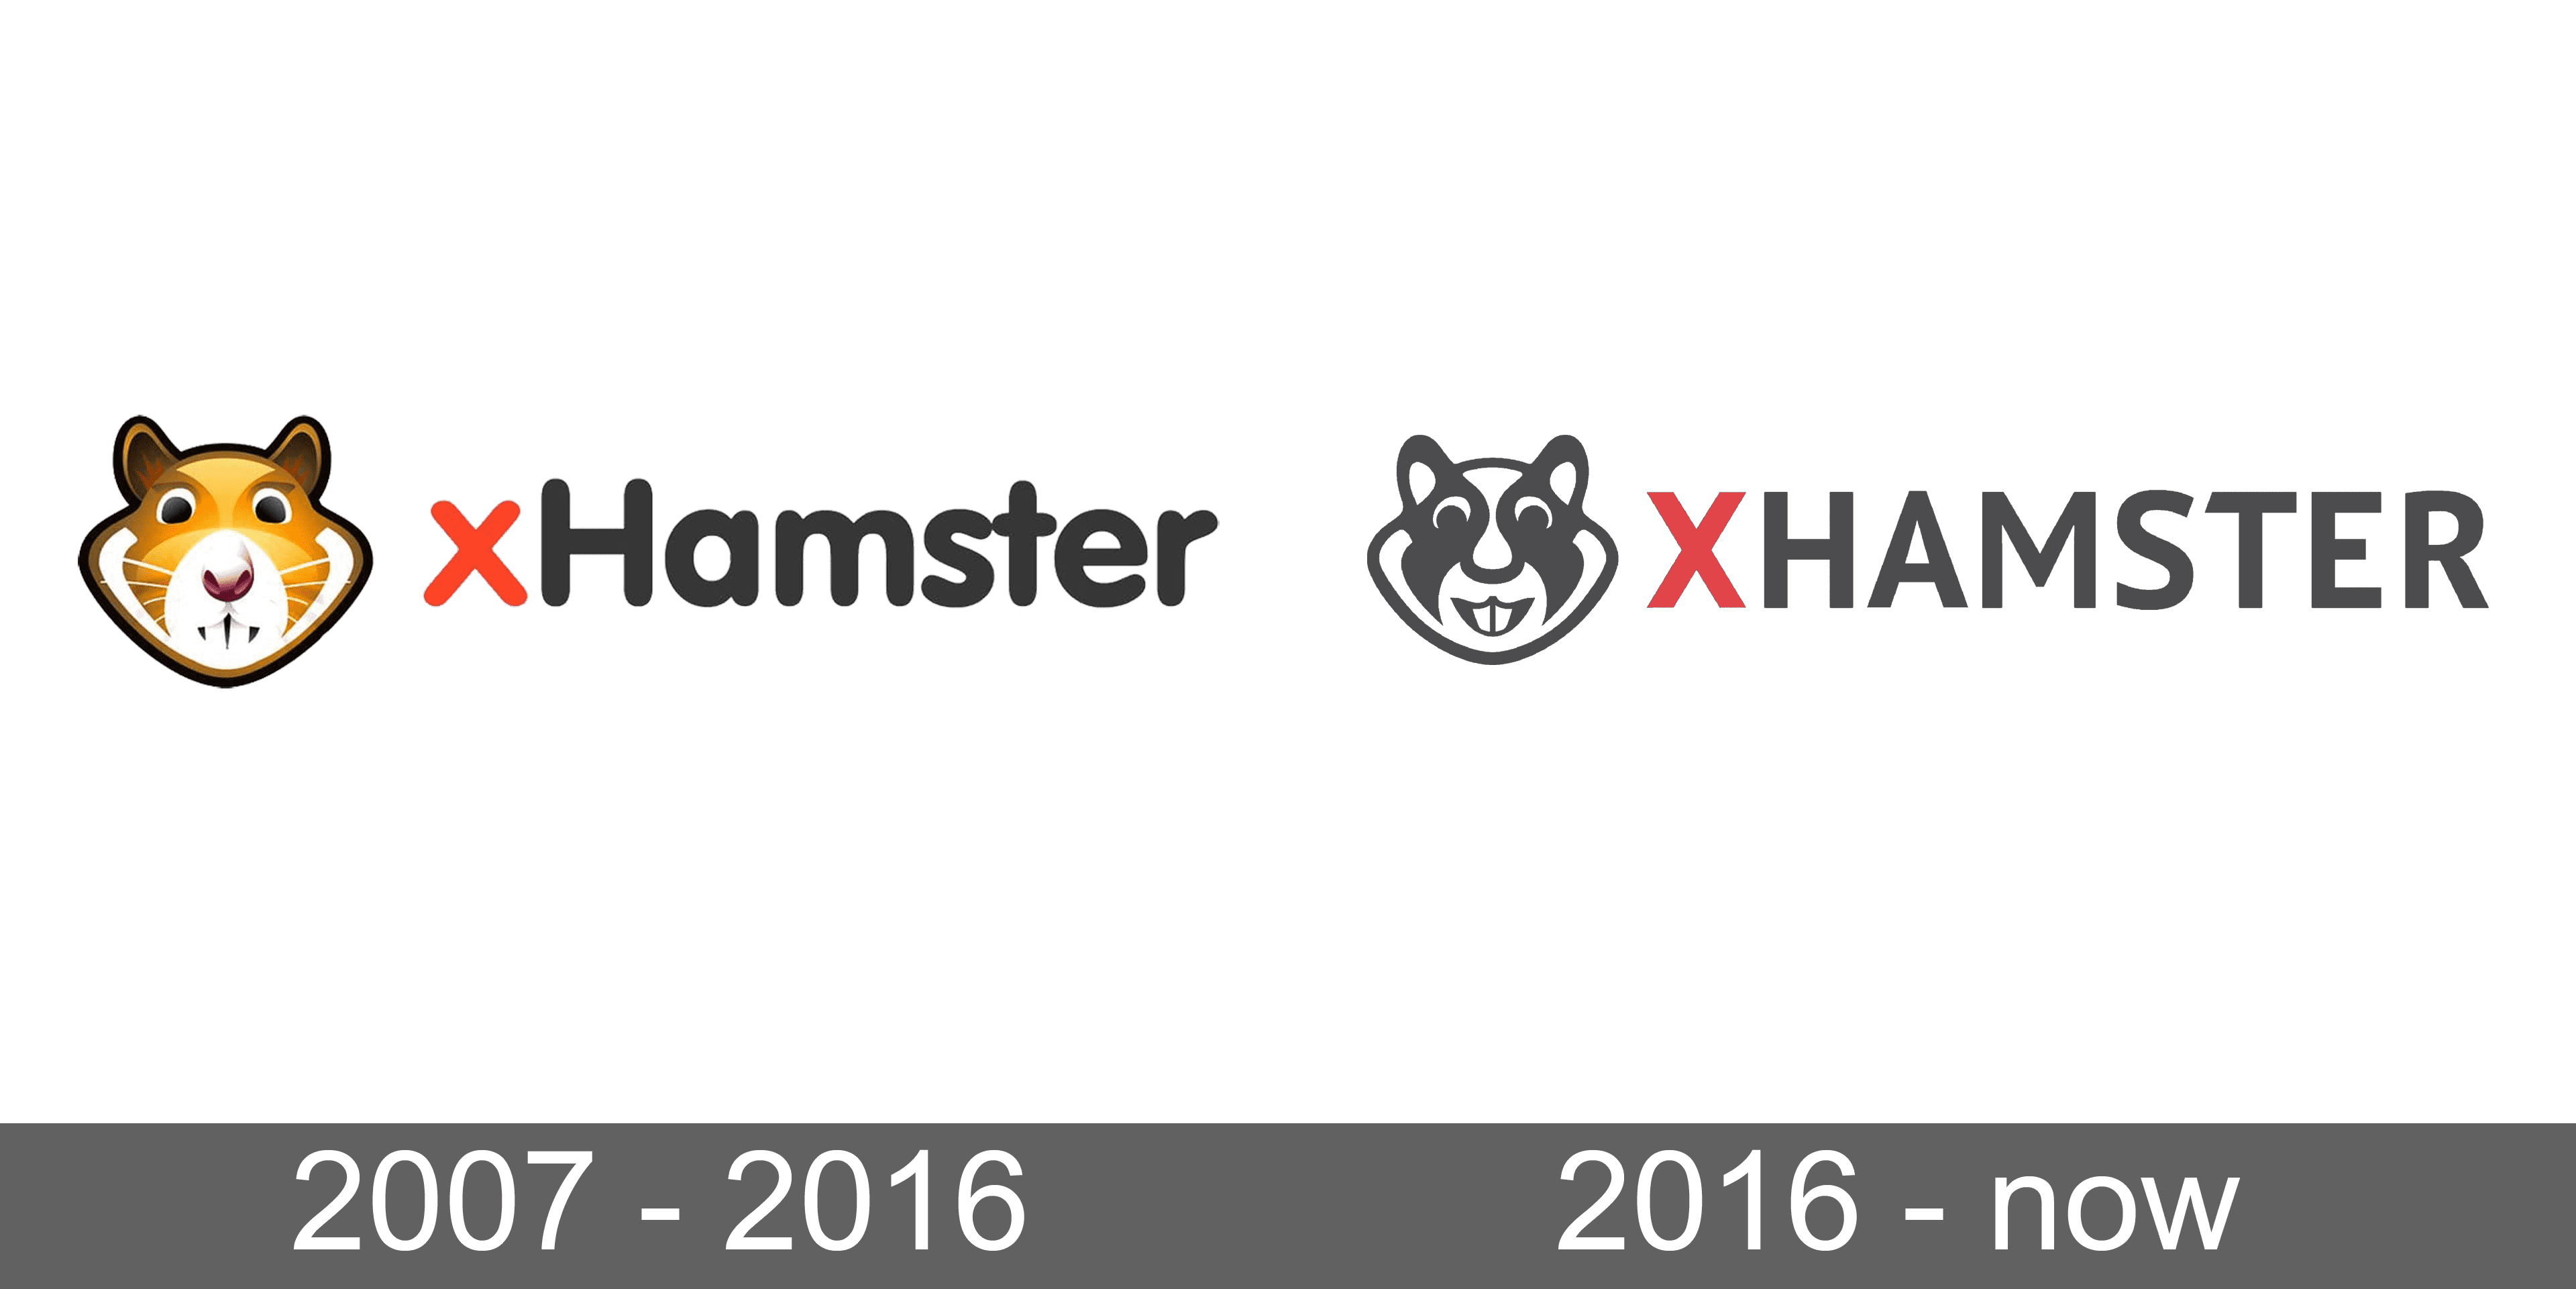 Www Xhamsitar Com - xHamster Logo and symbol, meaning, history, sign.